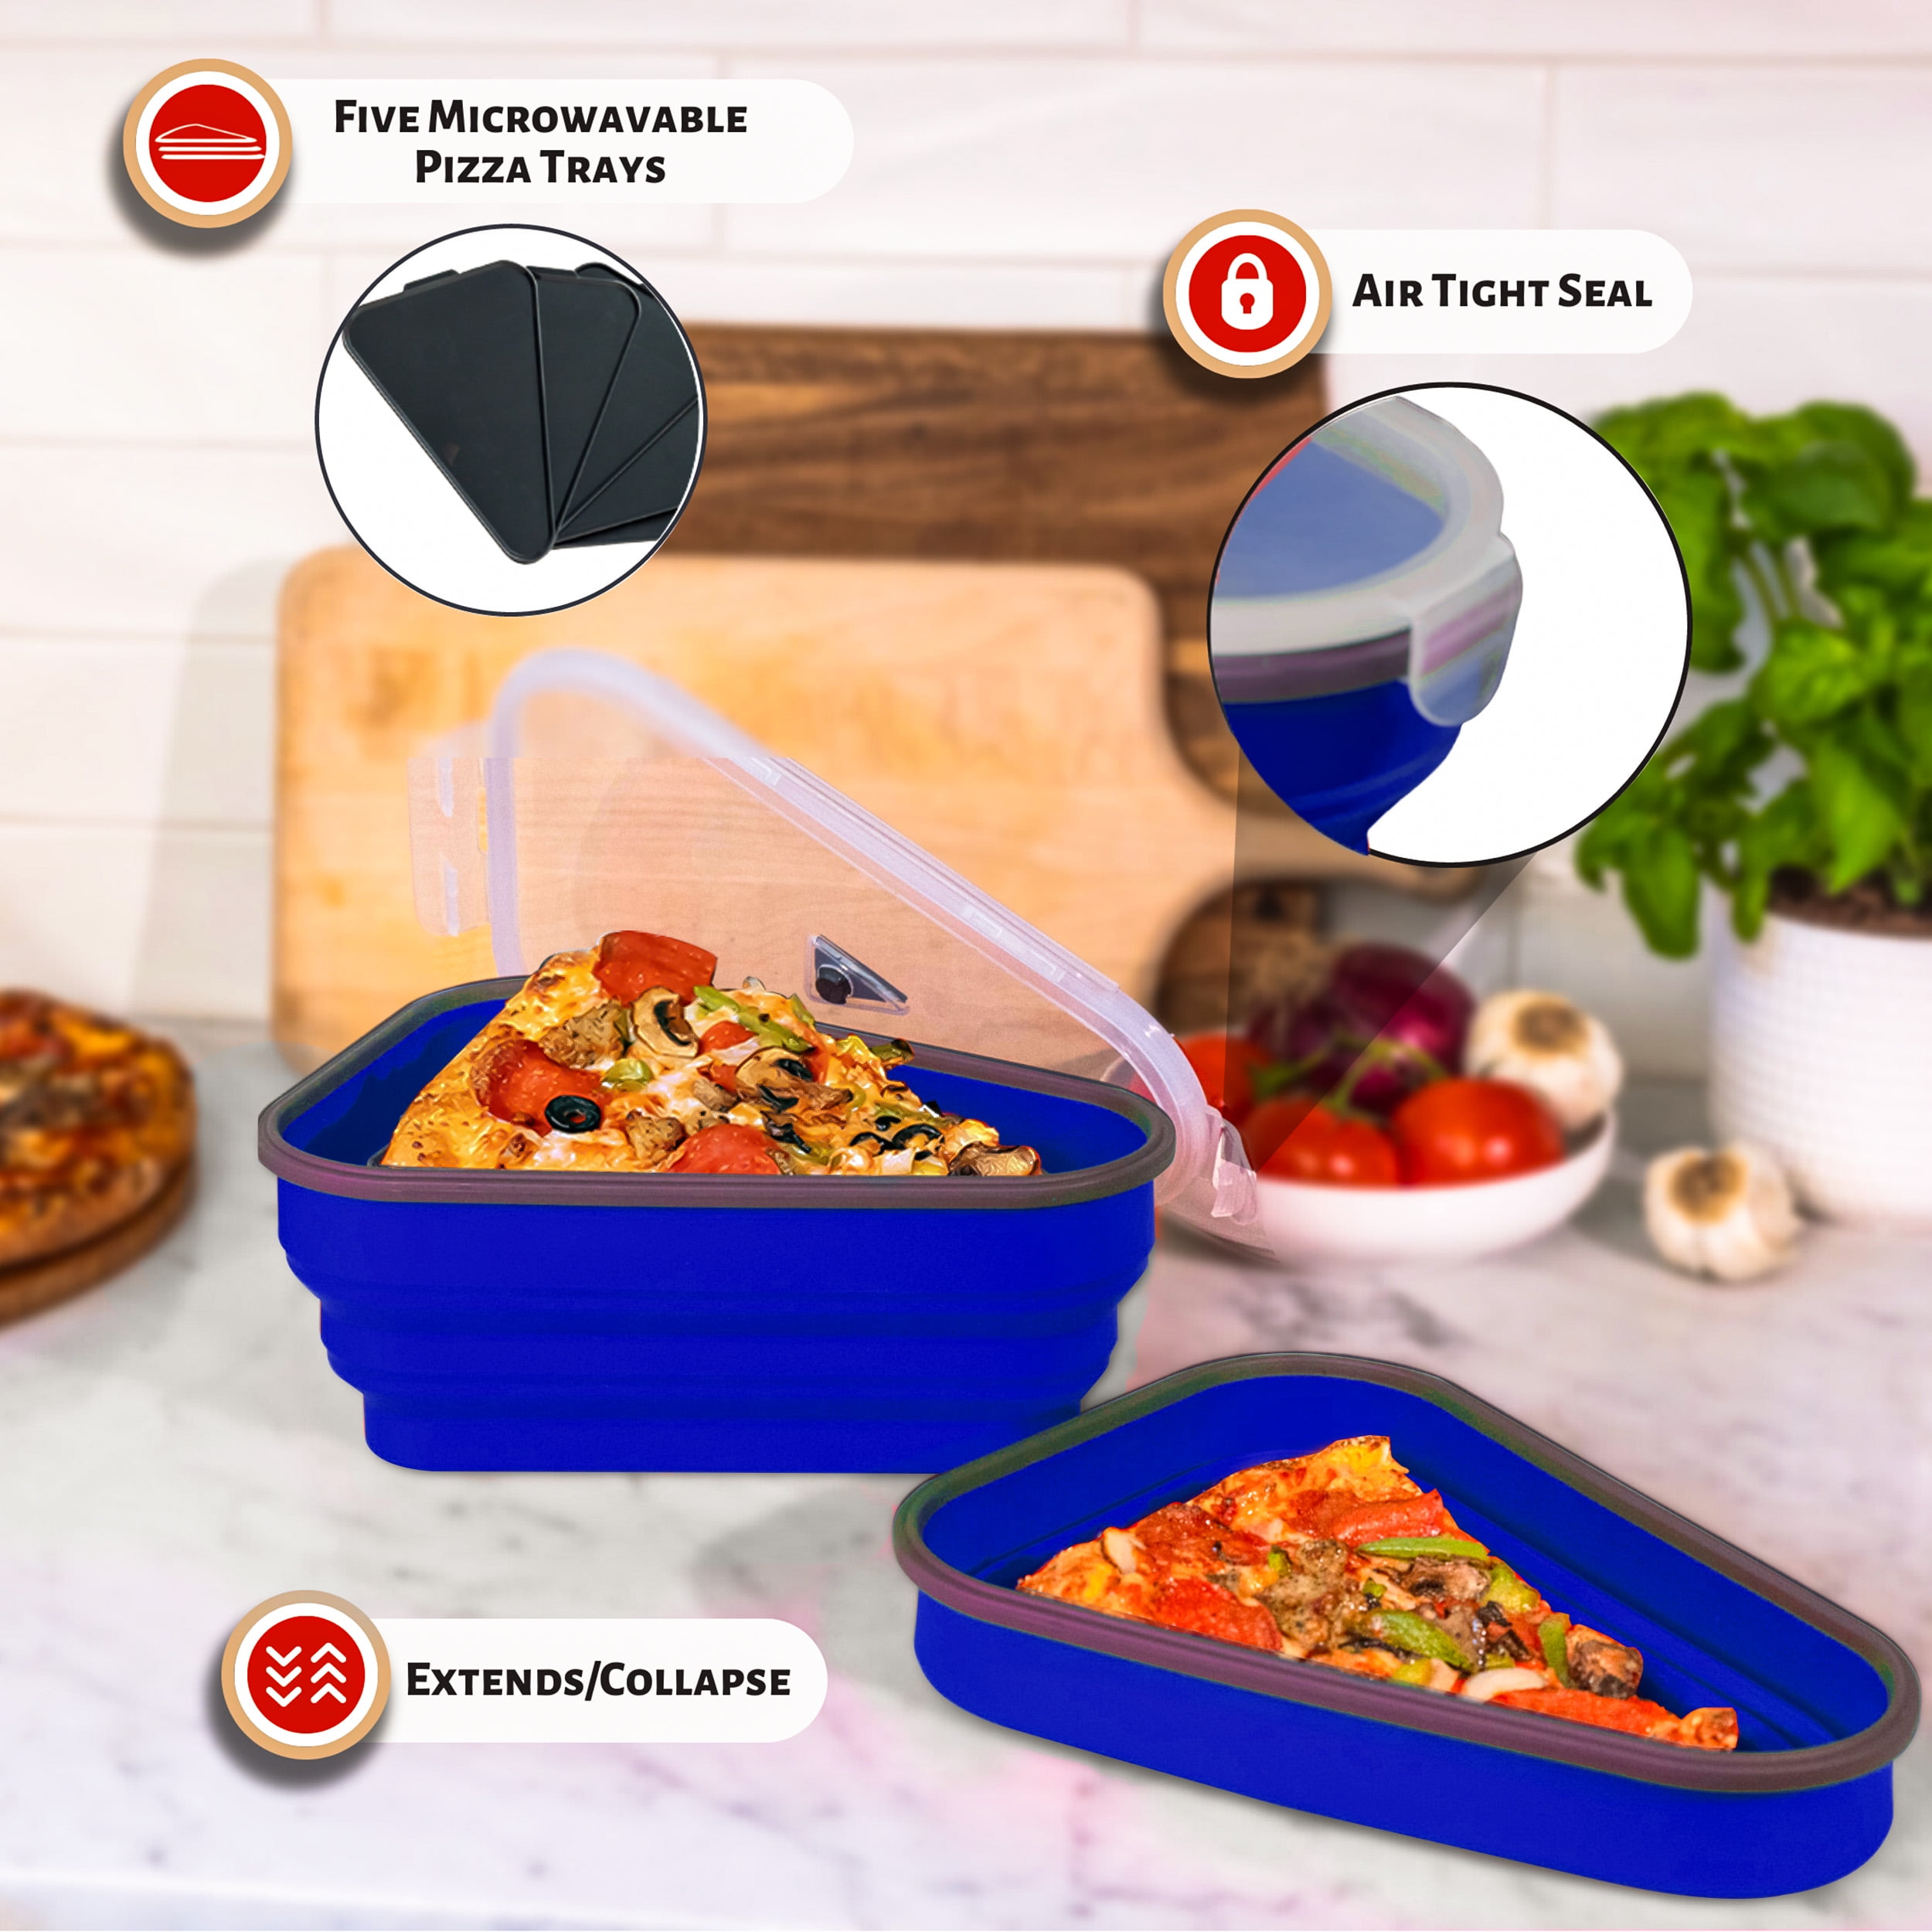 This Pizza Slice Storage Solution Will Save So Much Fridge Space – SheKnows